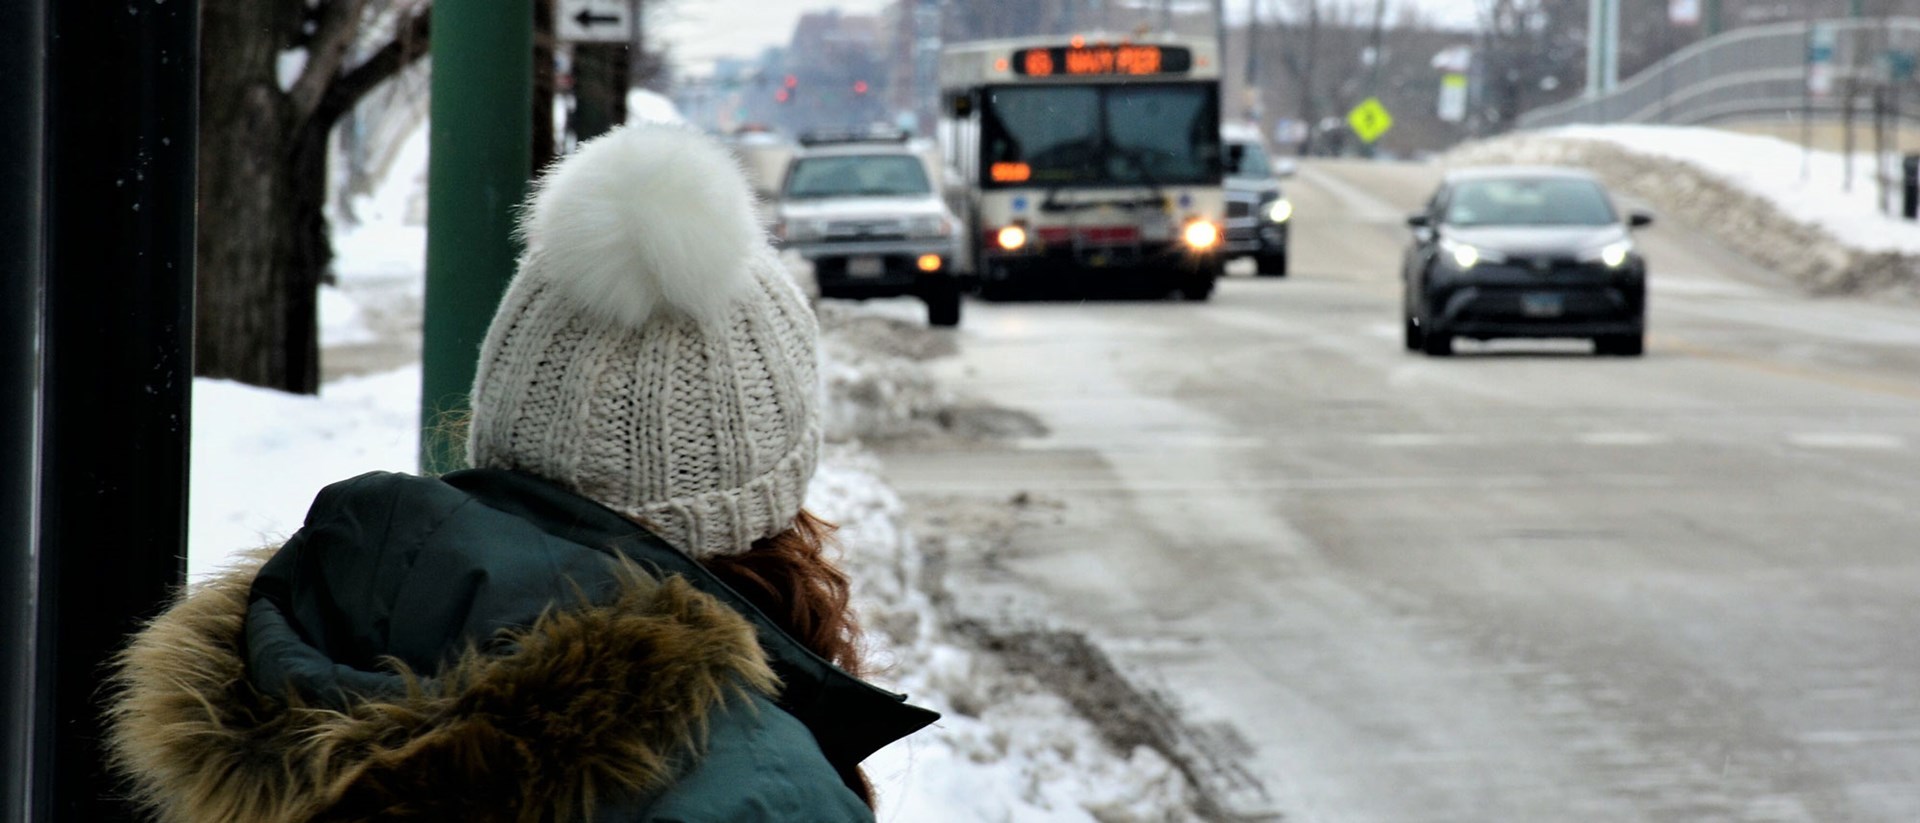 Someone in a winter hat and coat waiting at a bus stop with the bus in sight